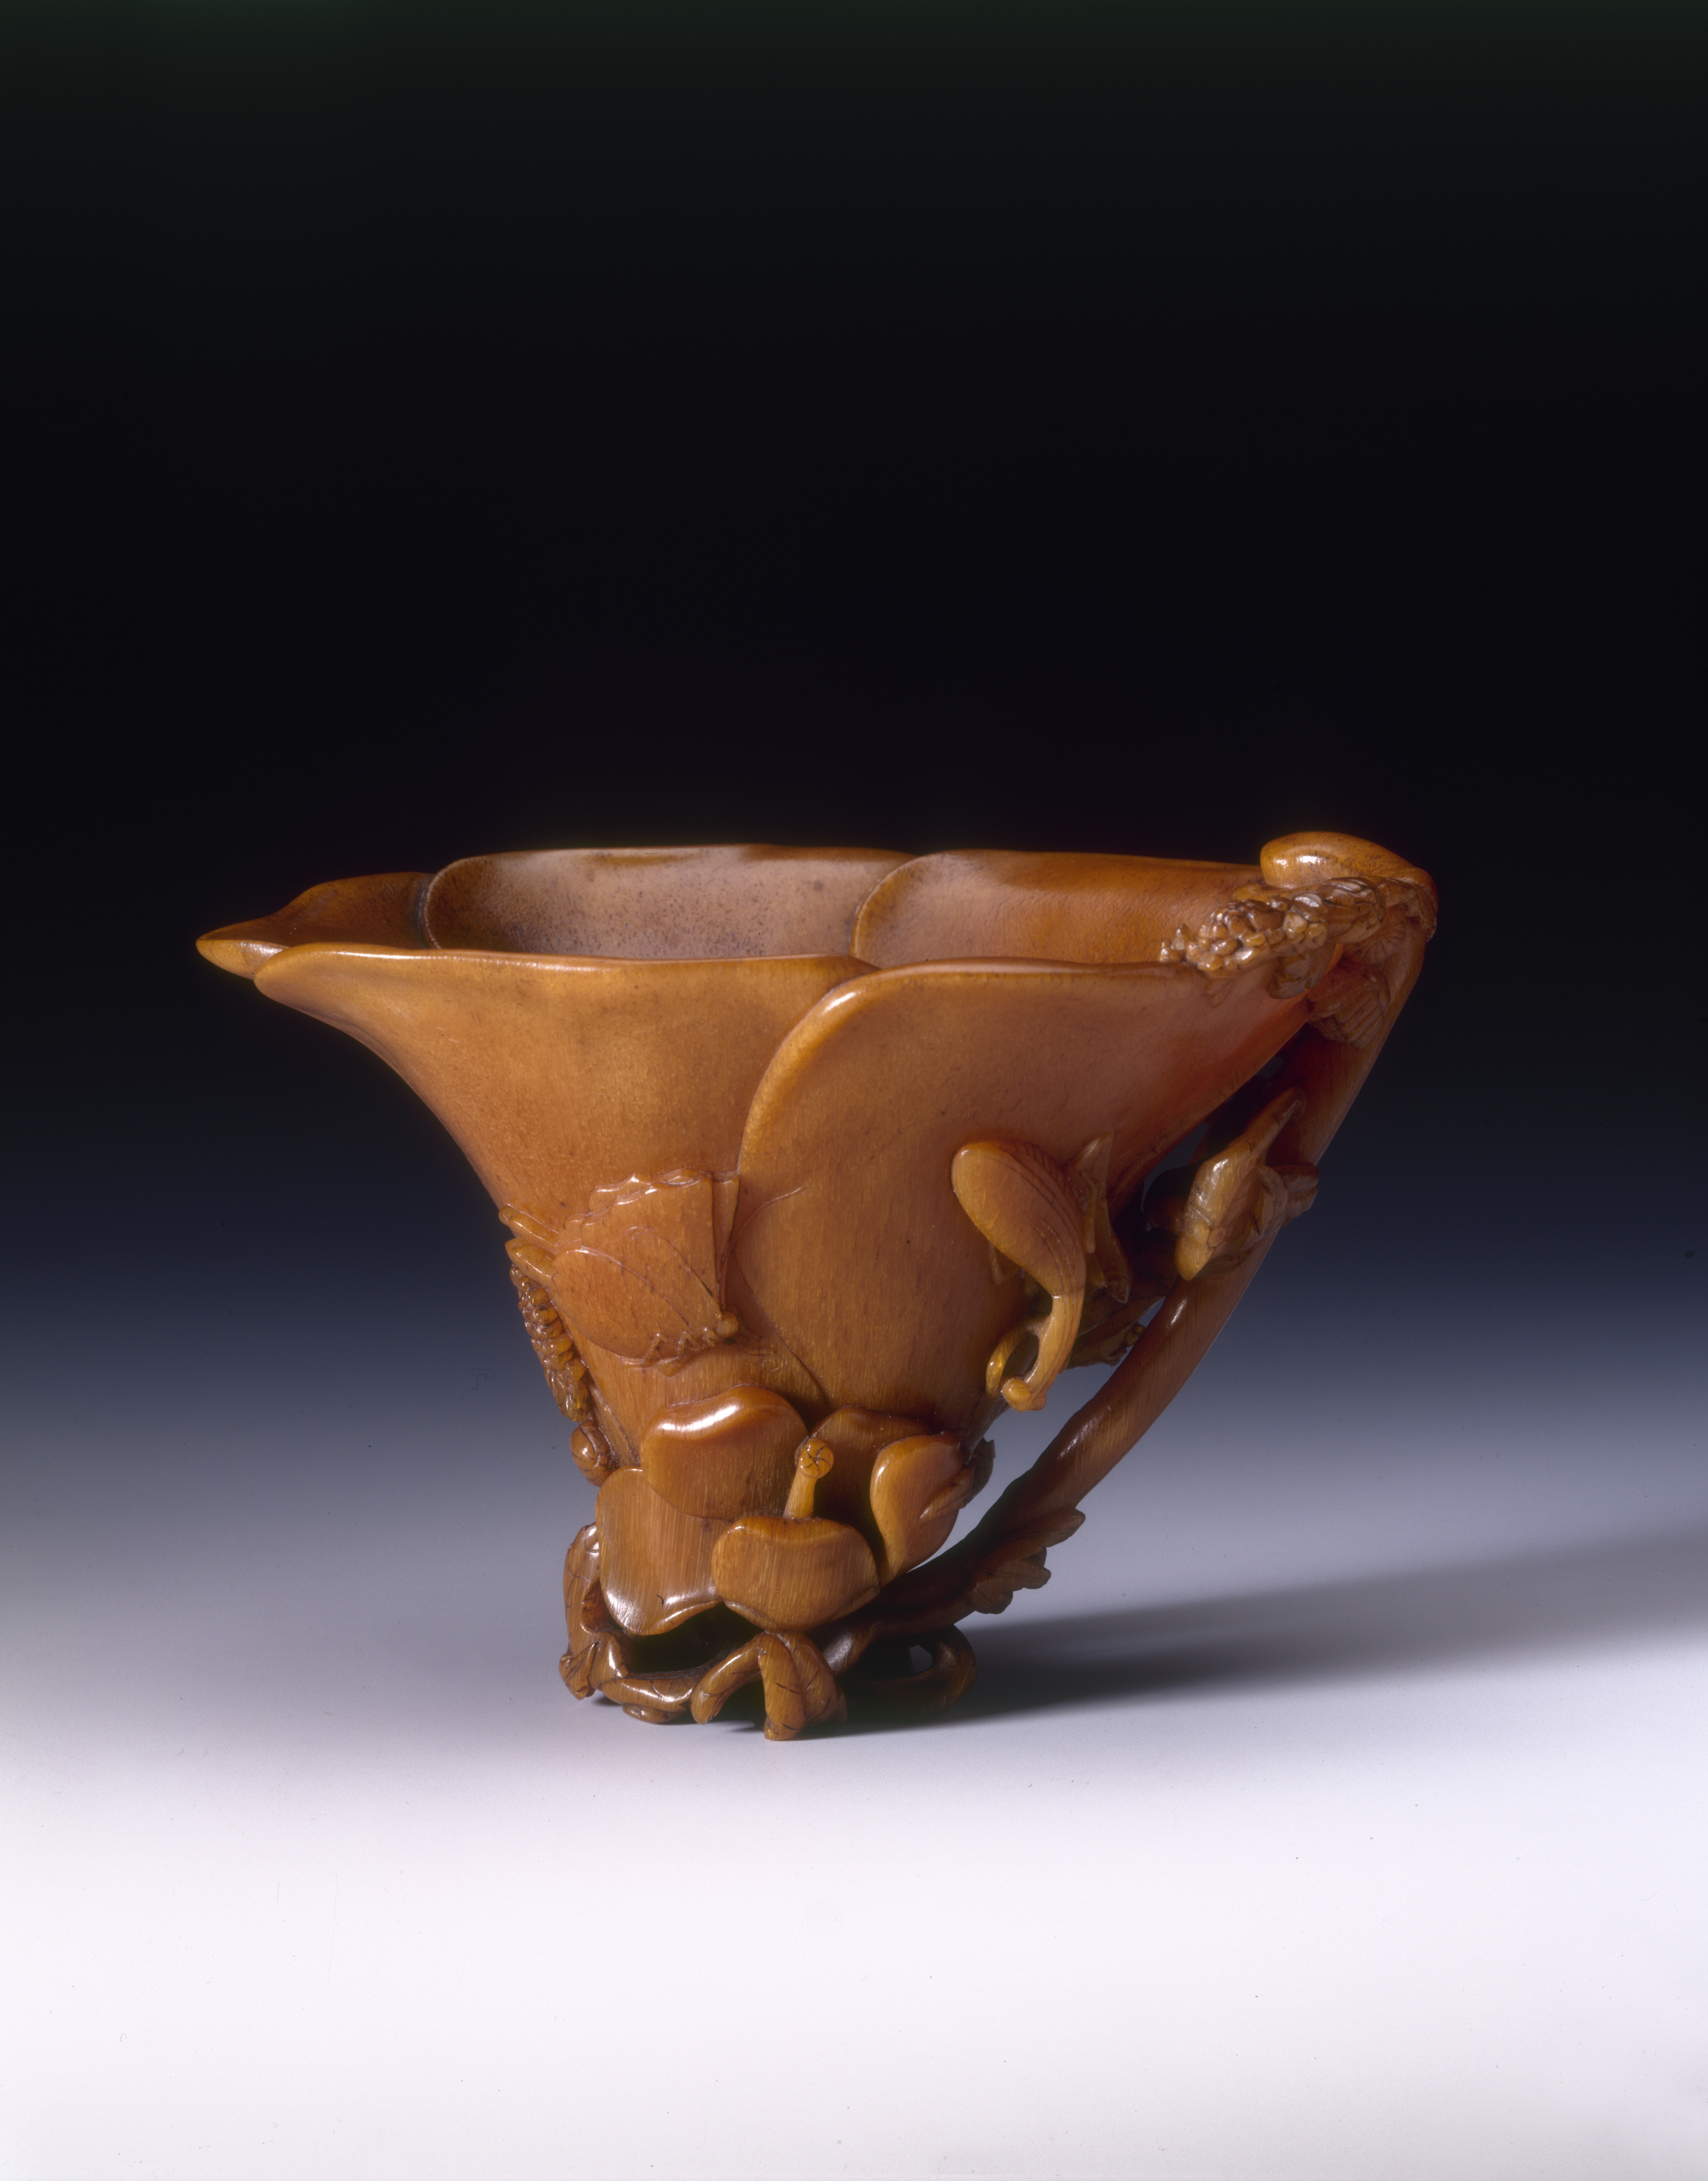 Rhinoceros horn cup carved with mantis and butterfly design